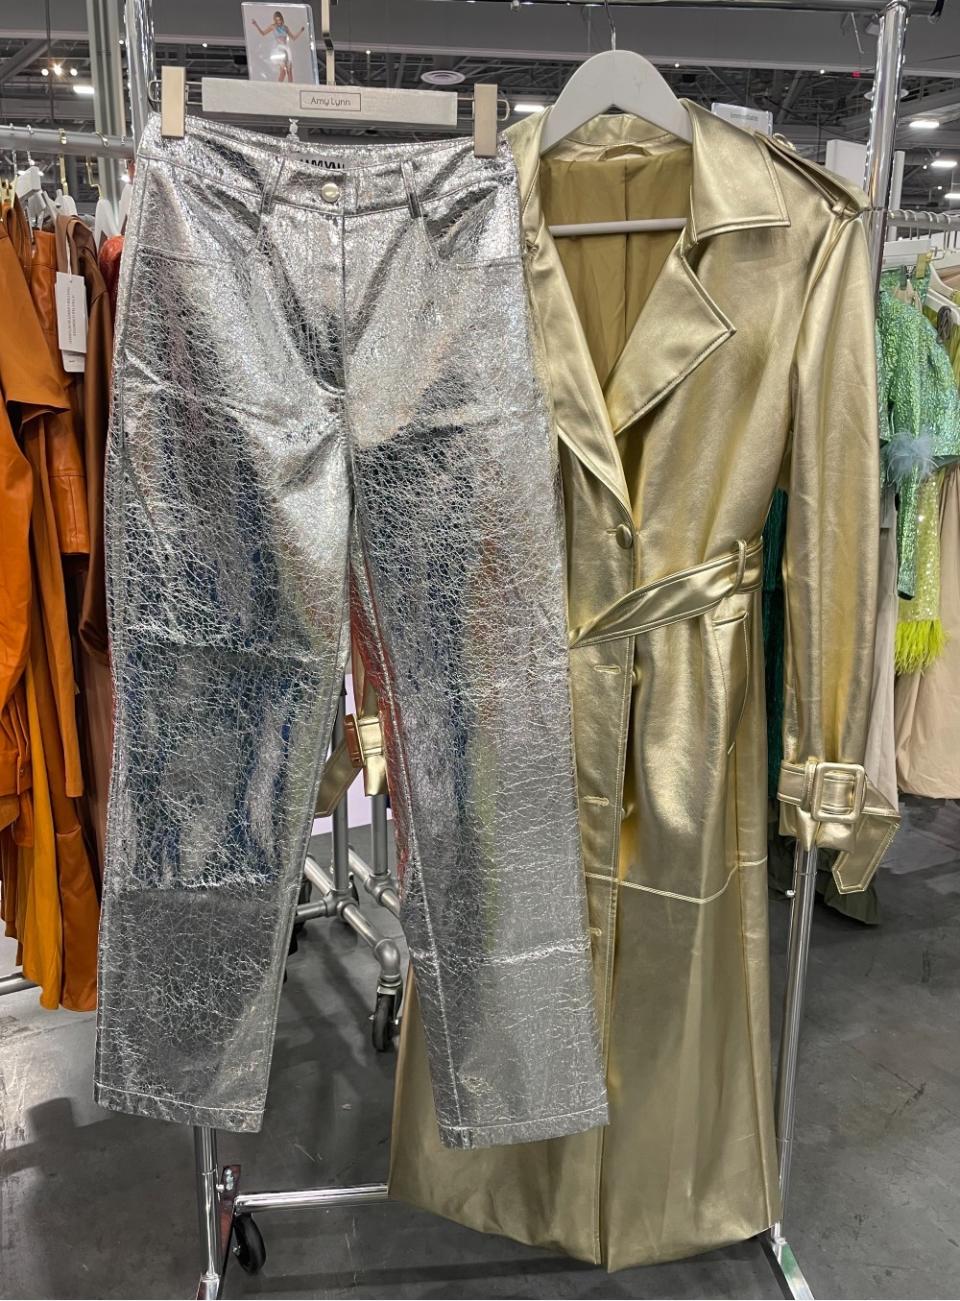 Metallic faux leather pants and jacket by AmyLynn.